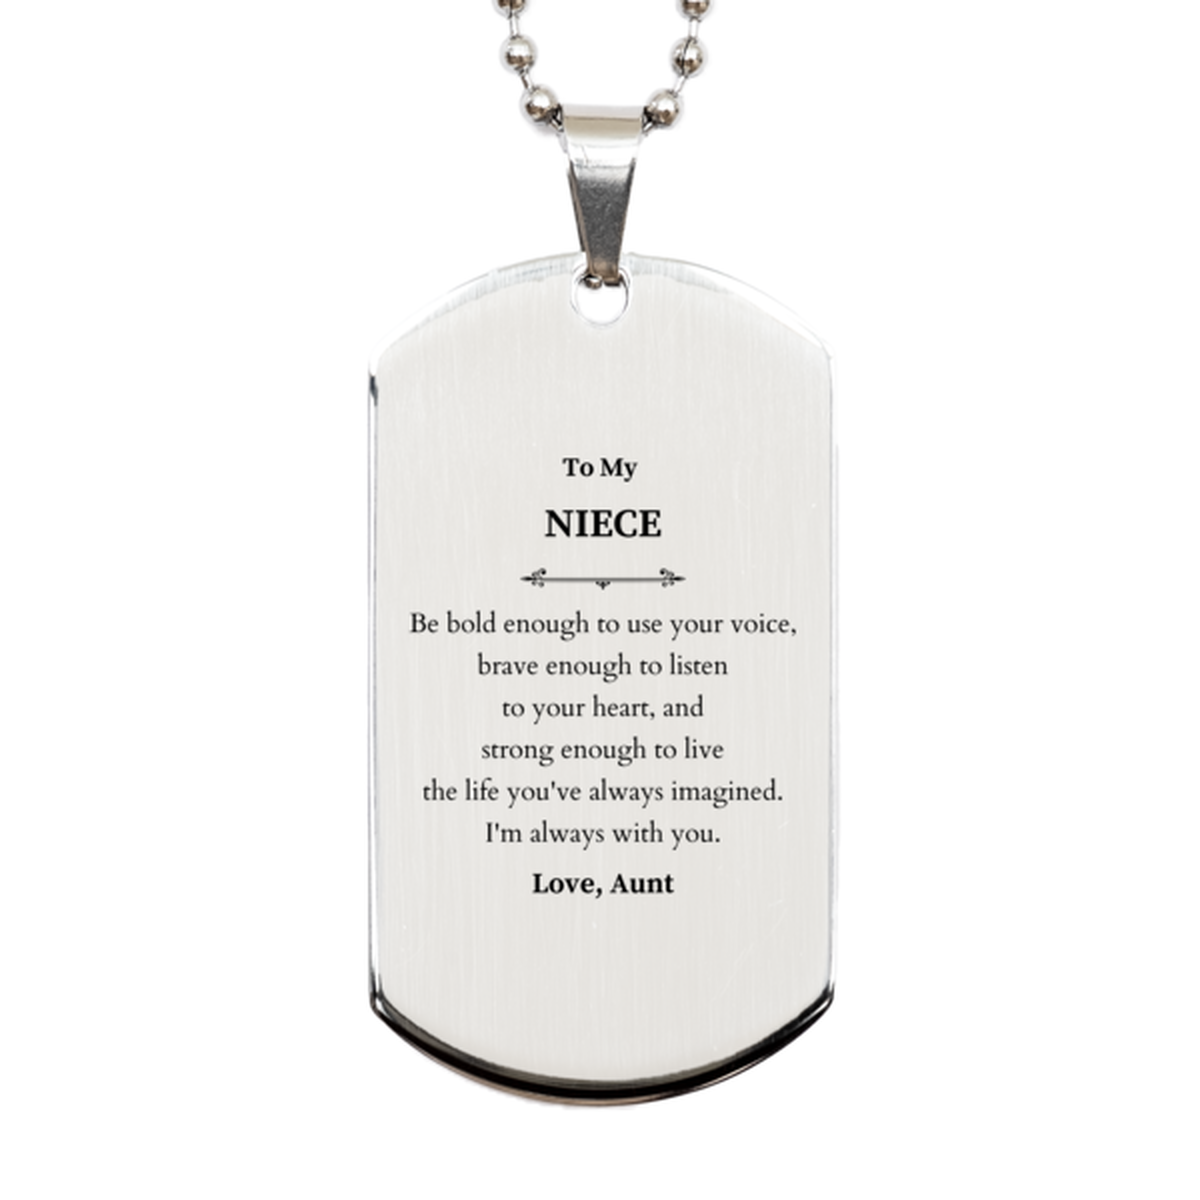 Keepsake Niece Silver Dog Tag Gift Idea Graduation Christmas Birthday Niece from Aunt, Niece Be bold enough to use your voice, brave enough to listen to your heart. Love, Aunt